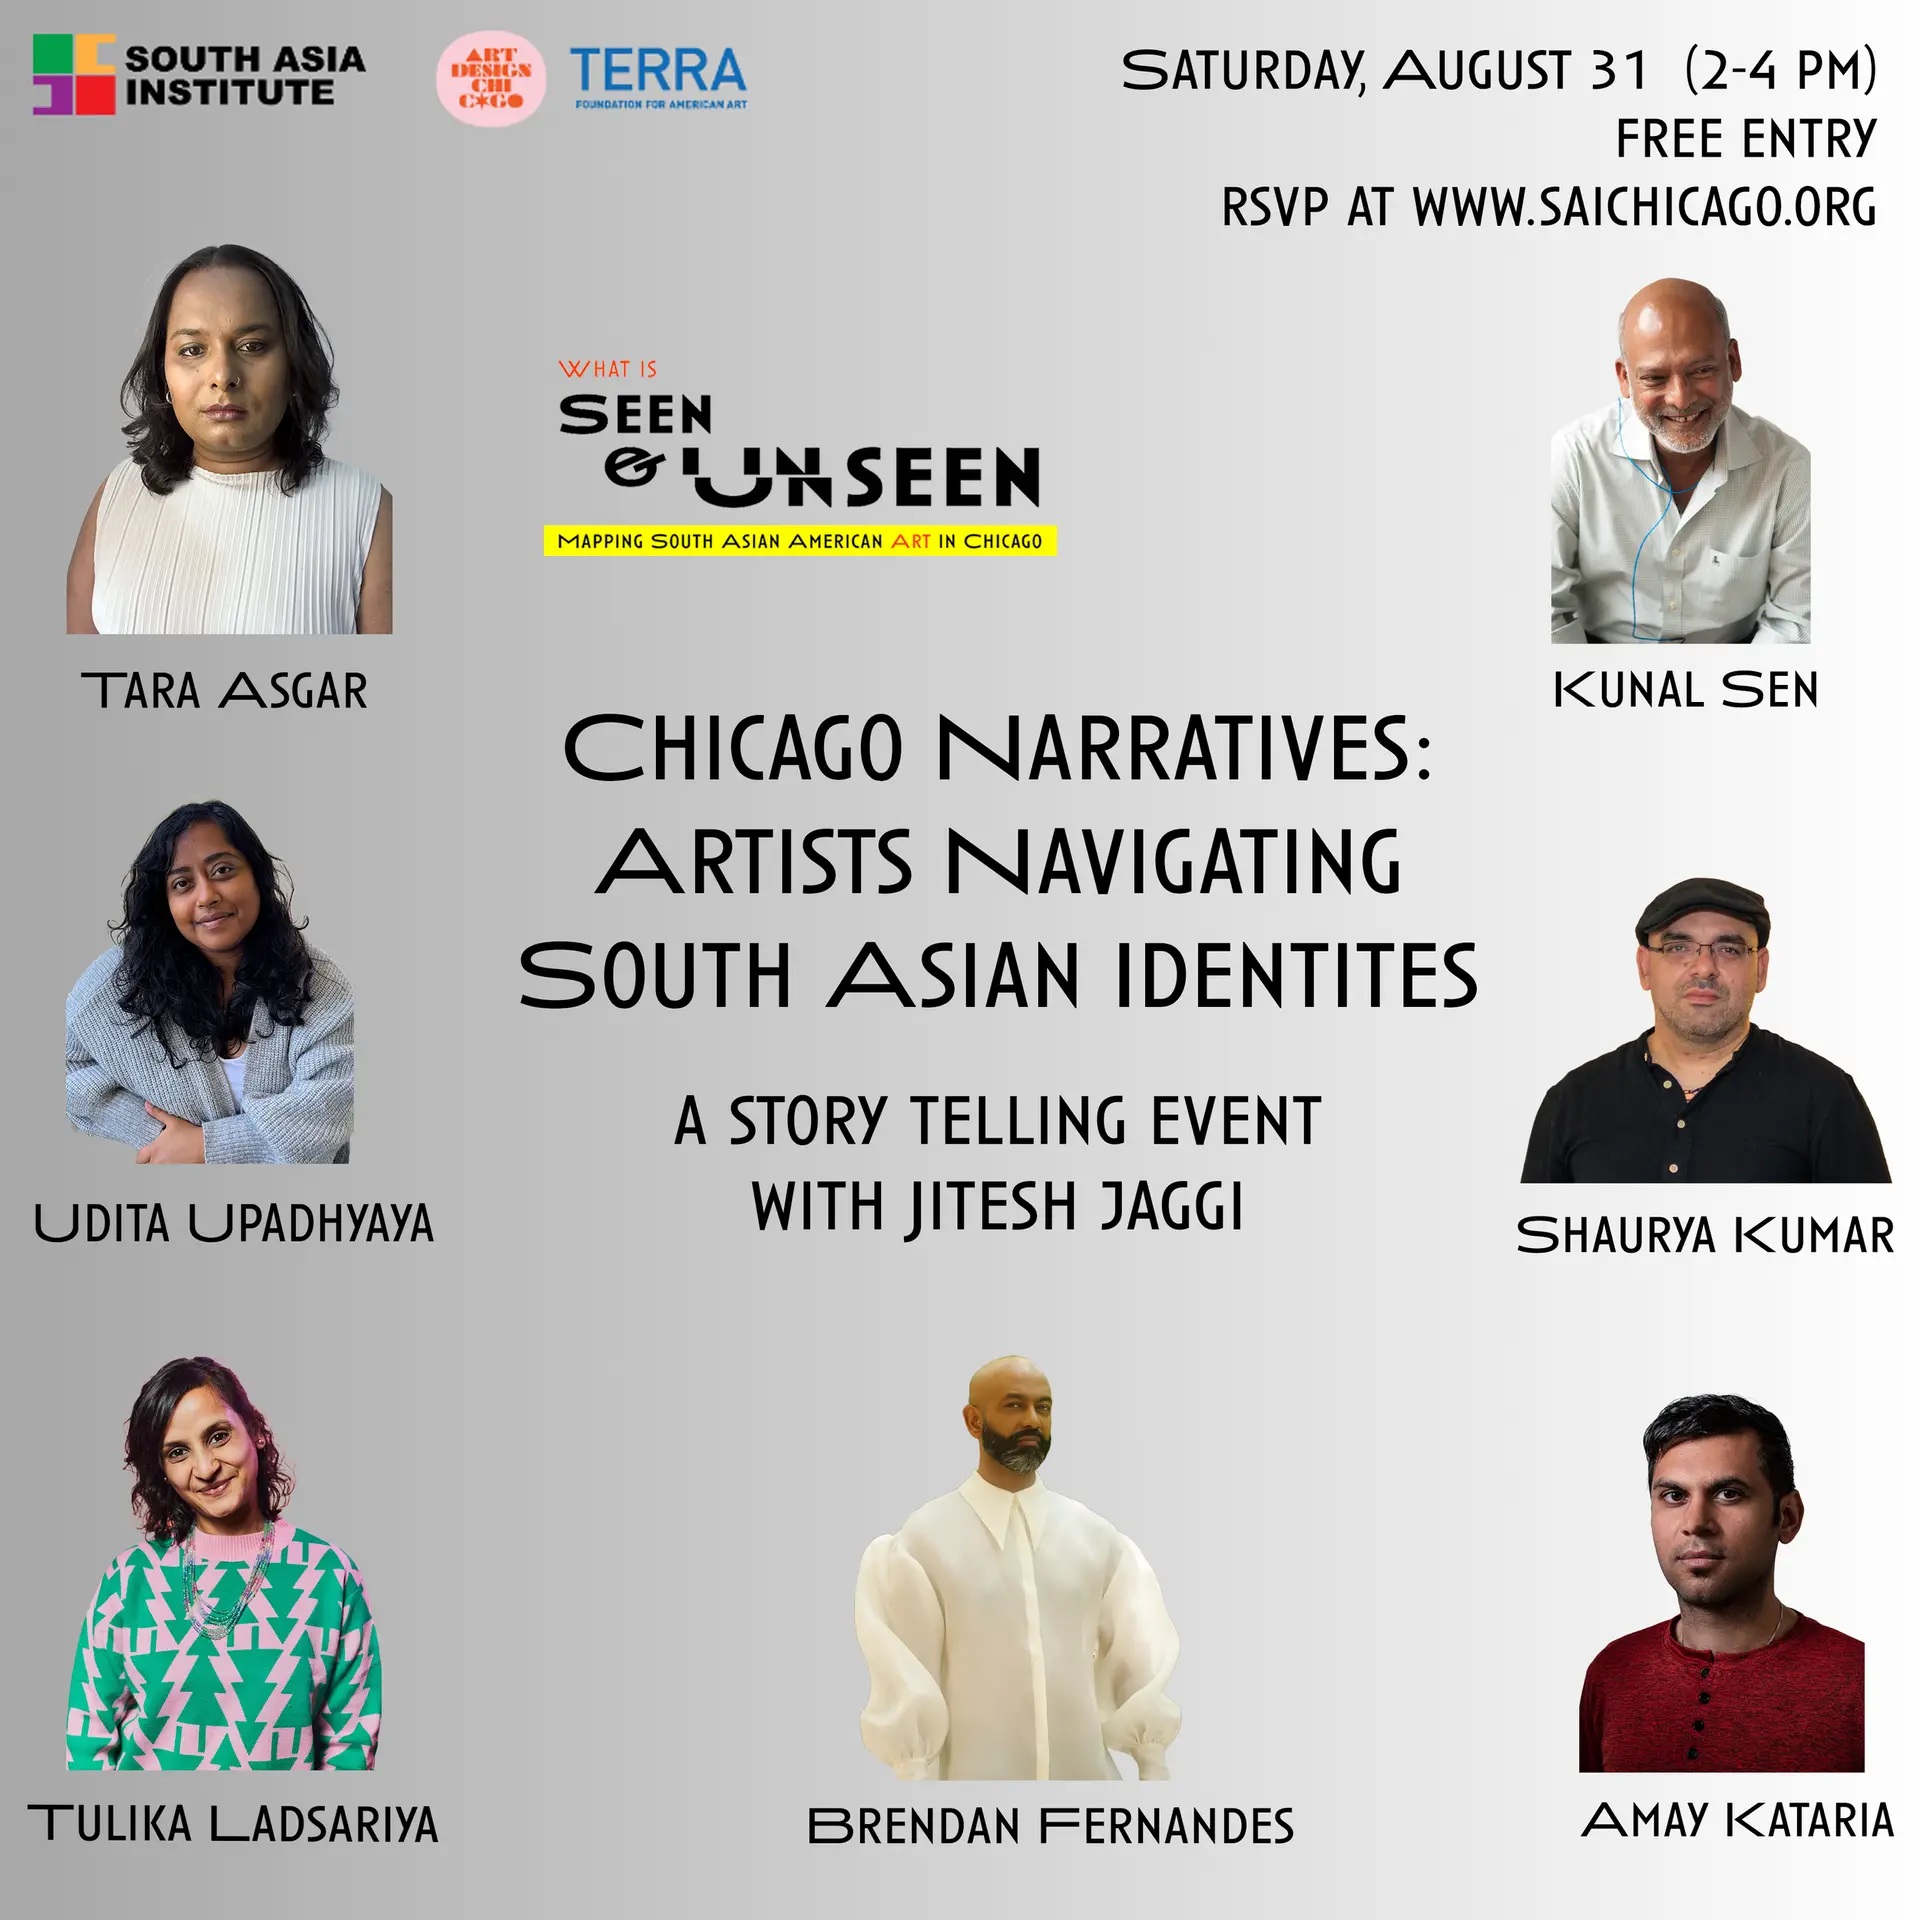 Chicago Narratives: Artists Navigating South Asian Identities